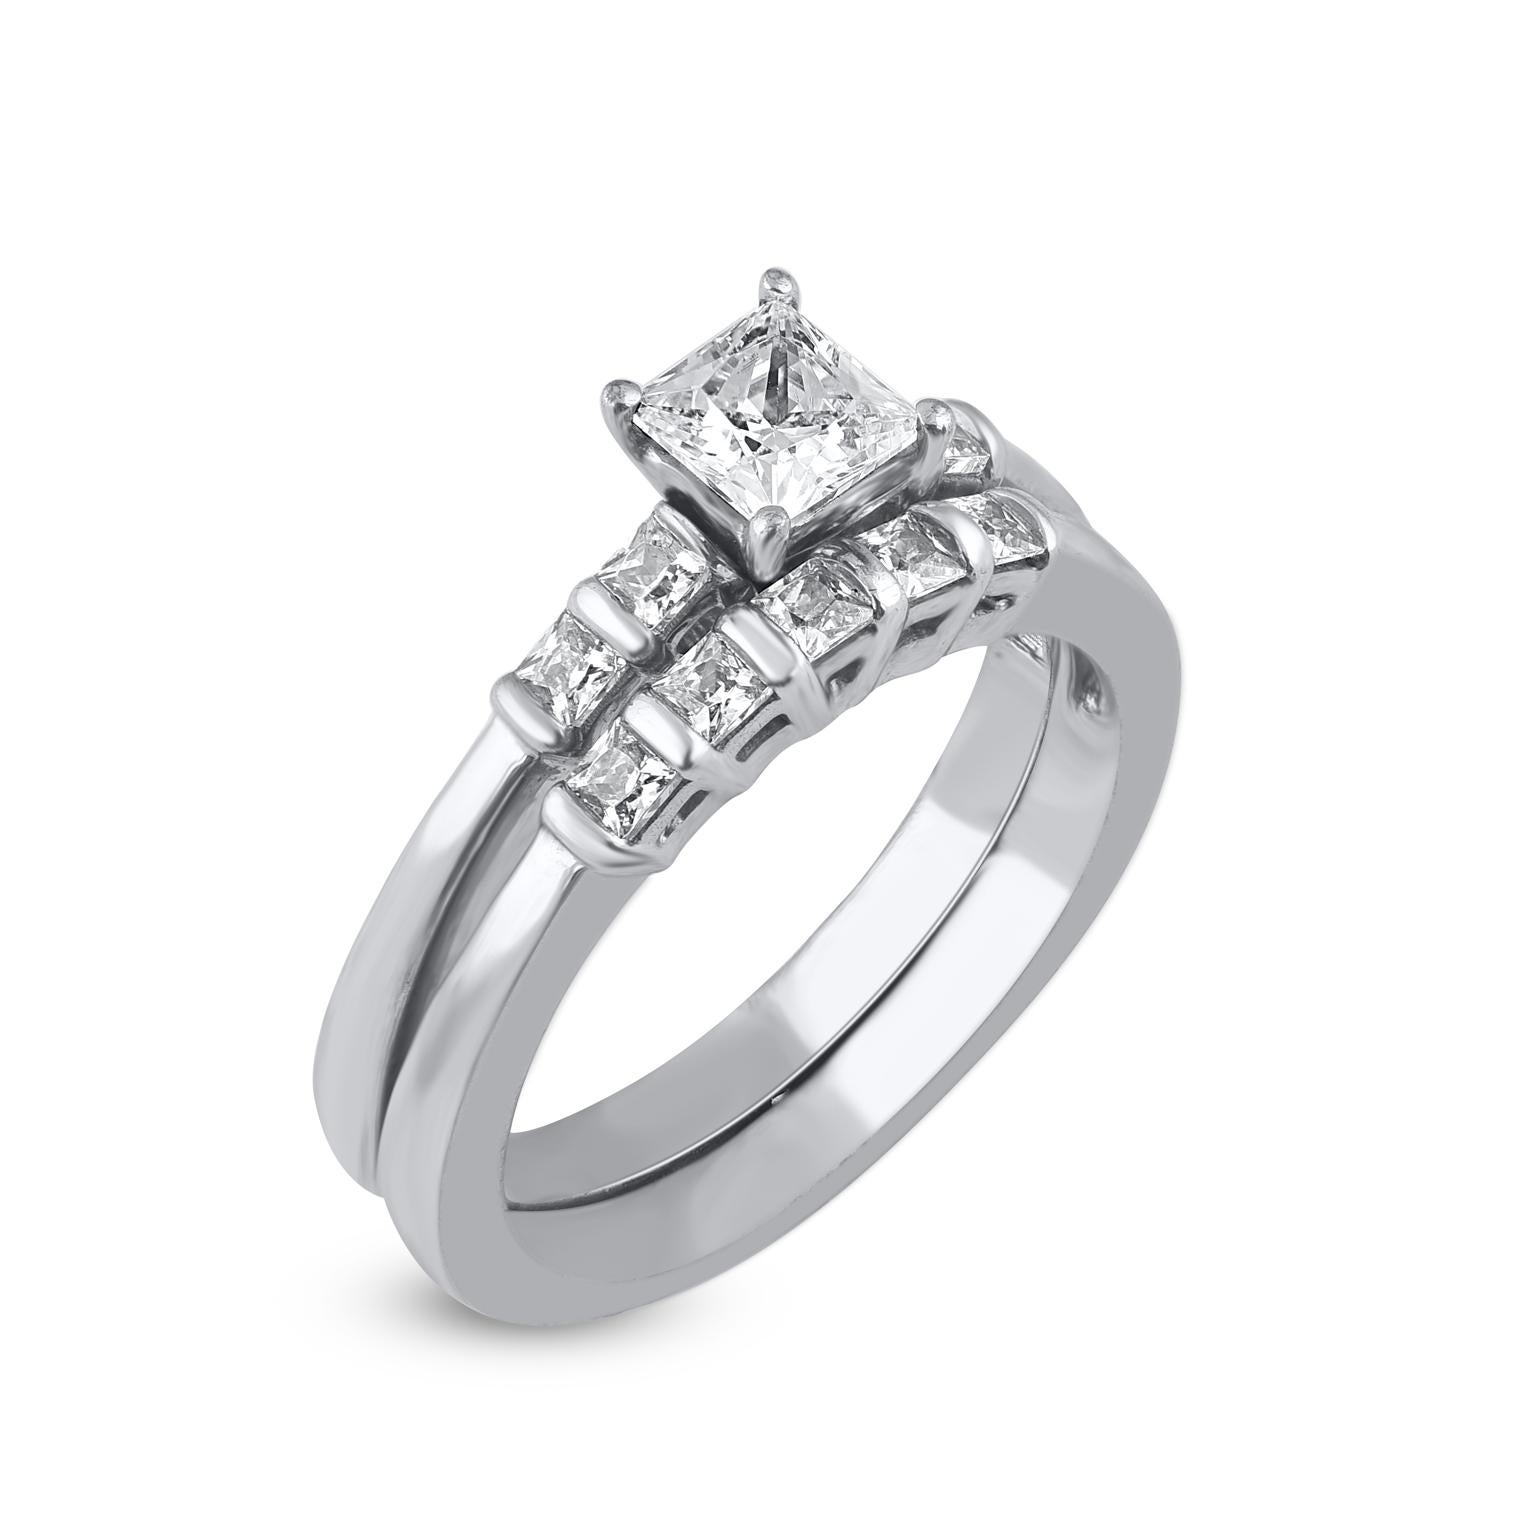 Sweet and simple in design, this diamond five stone bridal ring set is sure to charm on your big day. Crafted in 14 Karat white gold. This wedding ring features a sparkling 44 brilliant cut and single cut round diamond beautifully set in prong &